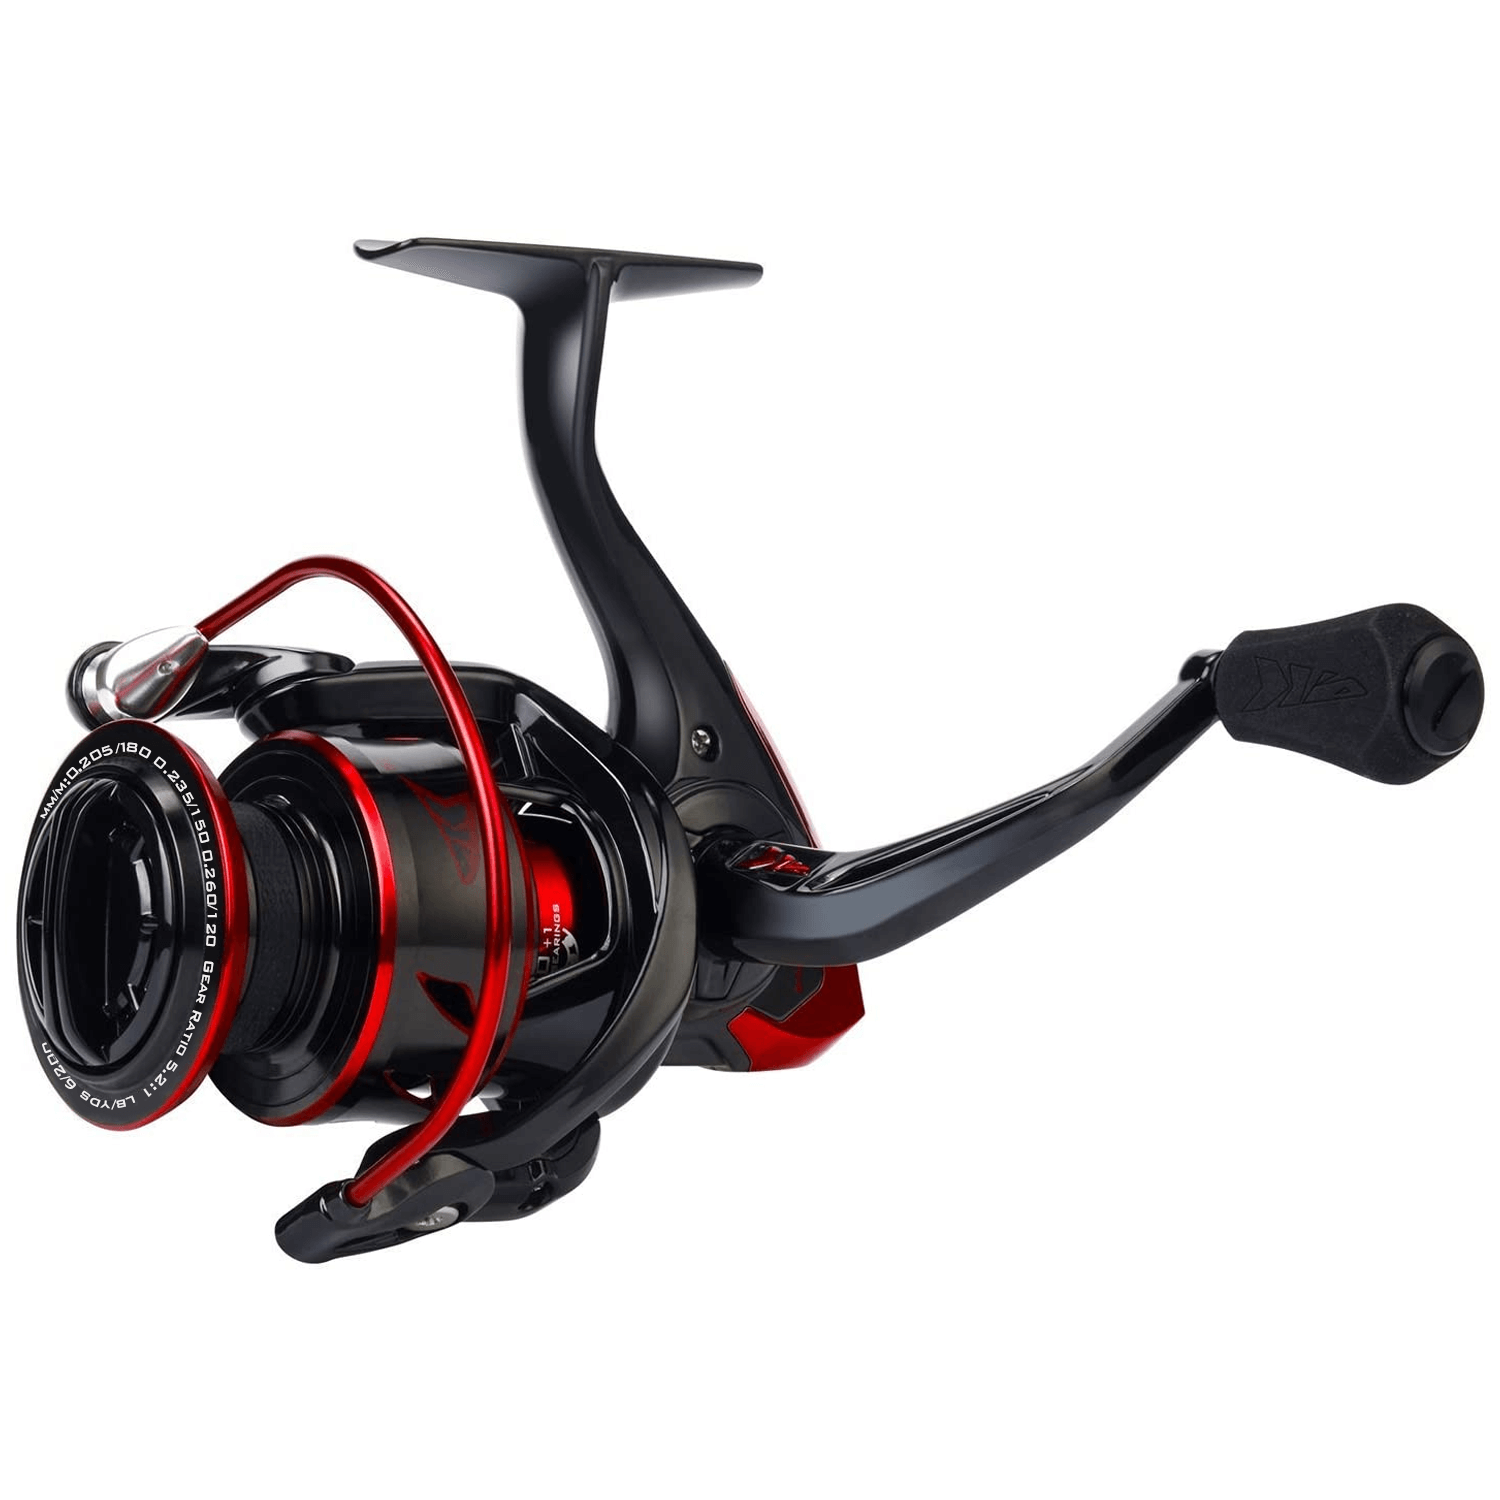 High Quality Saltwater Baitcasting Fishing Reels 5.2:1 Spinning